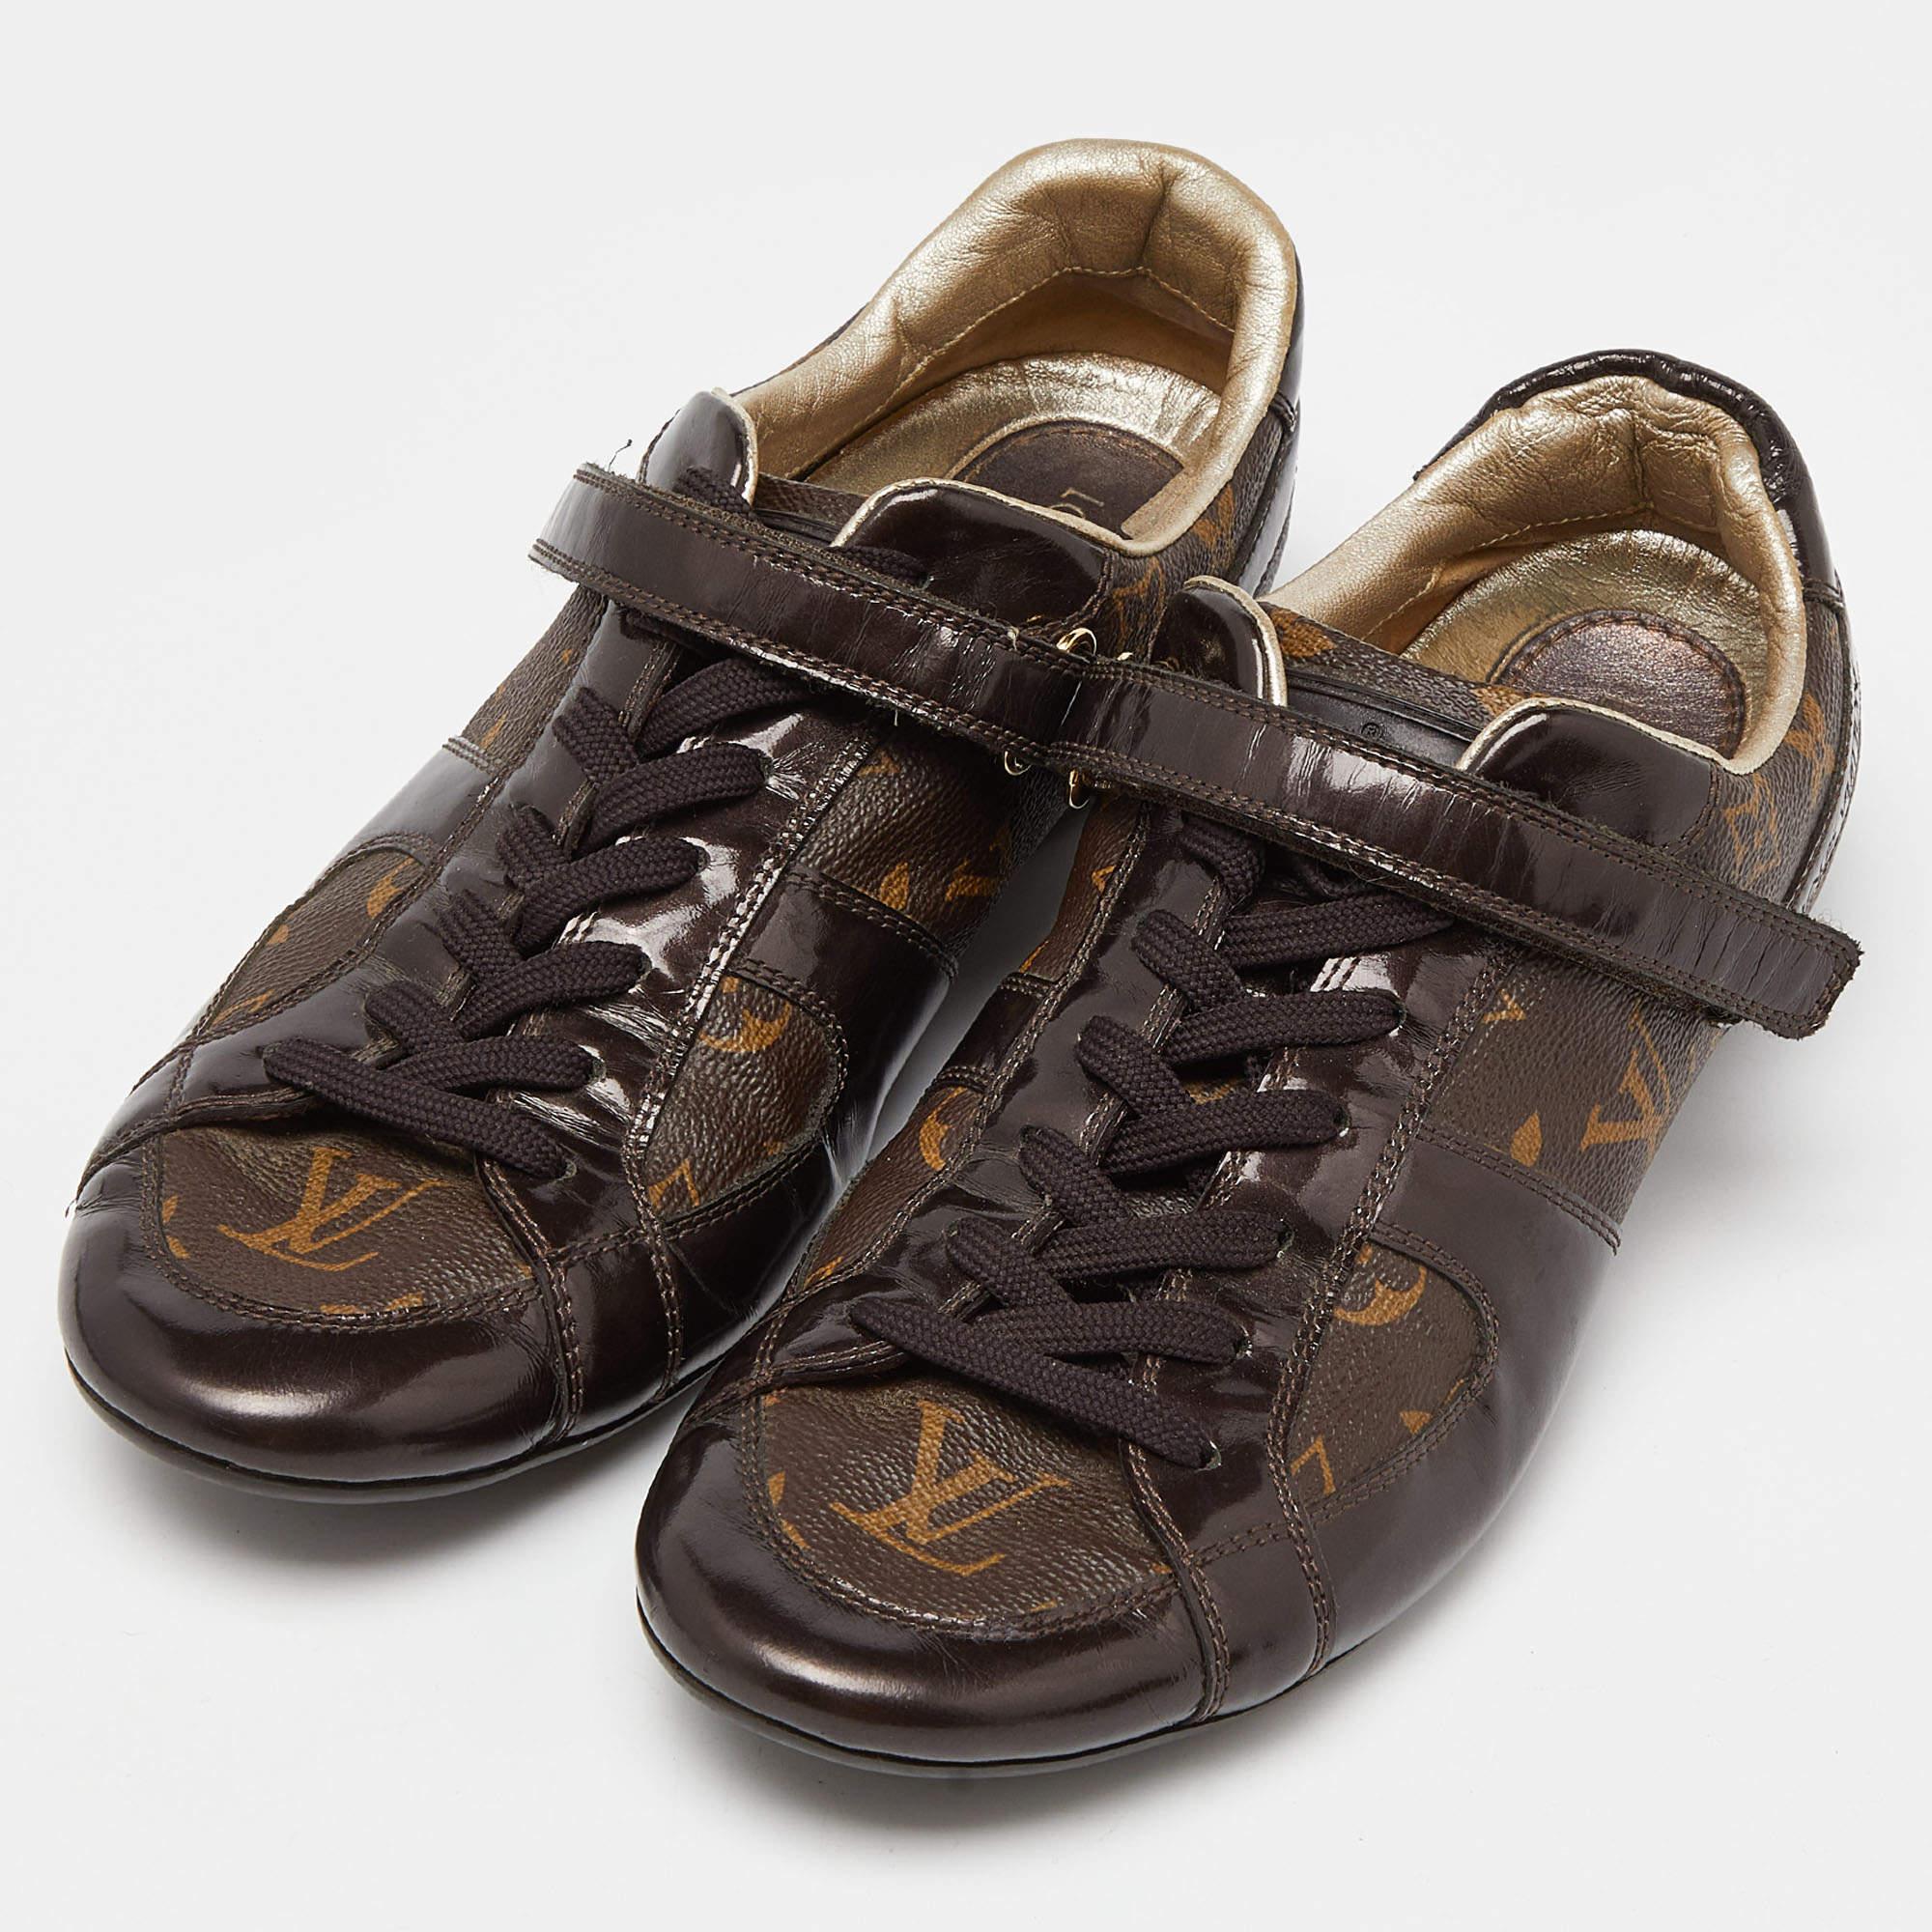 Louis Vuitton Brown Monogram Canvas and Patent Leather Gloe Trotter Sneakers Siz For Sale 1